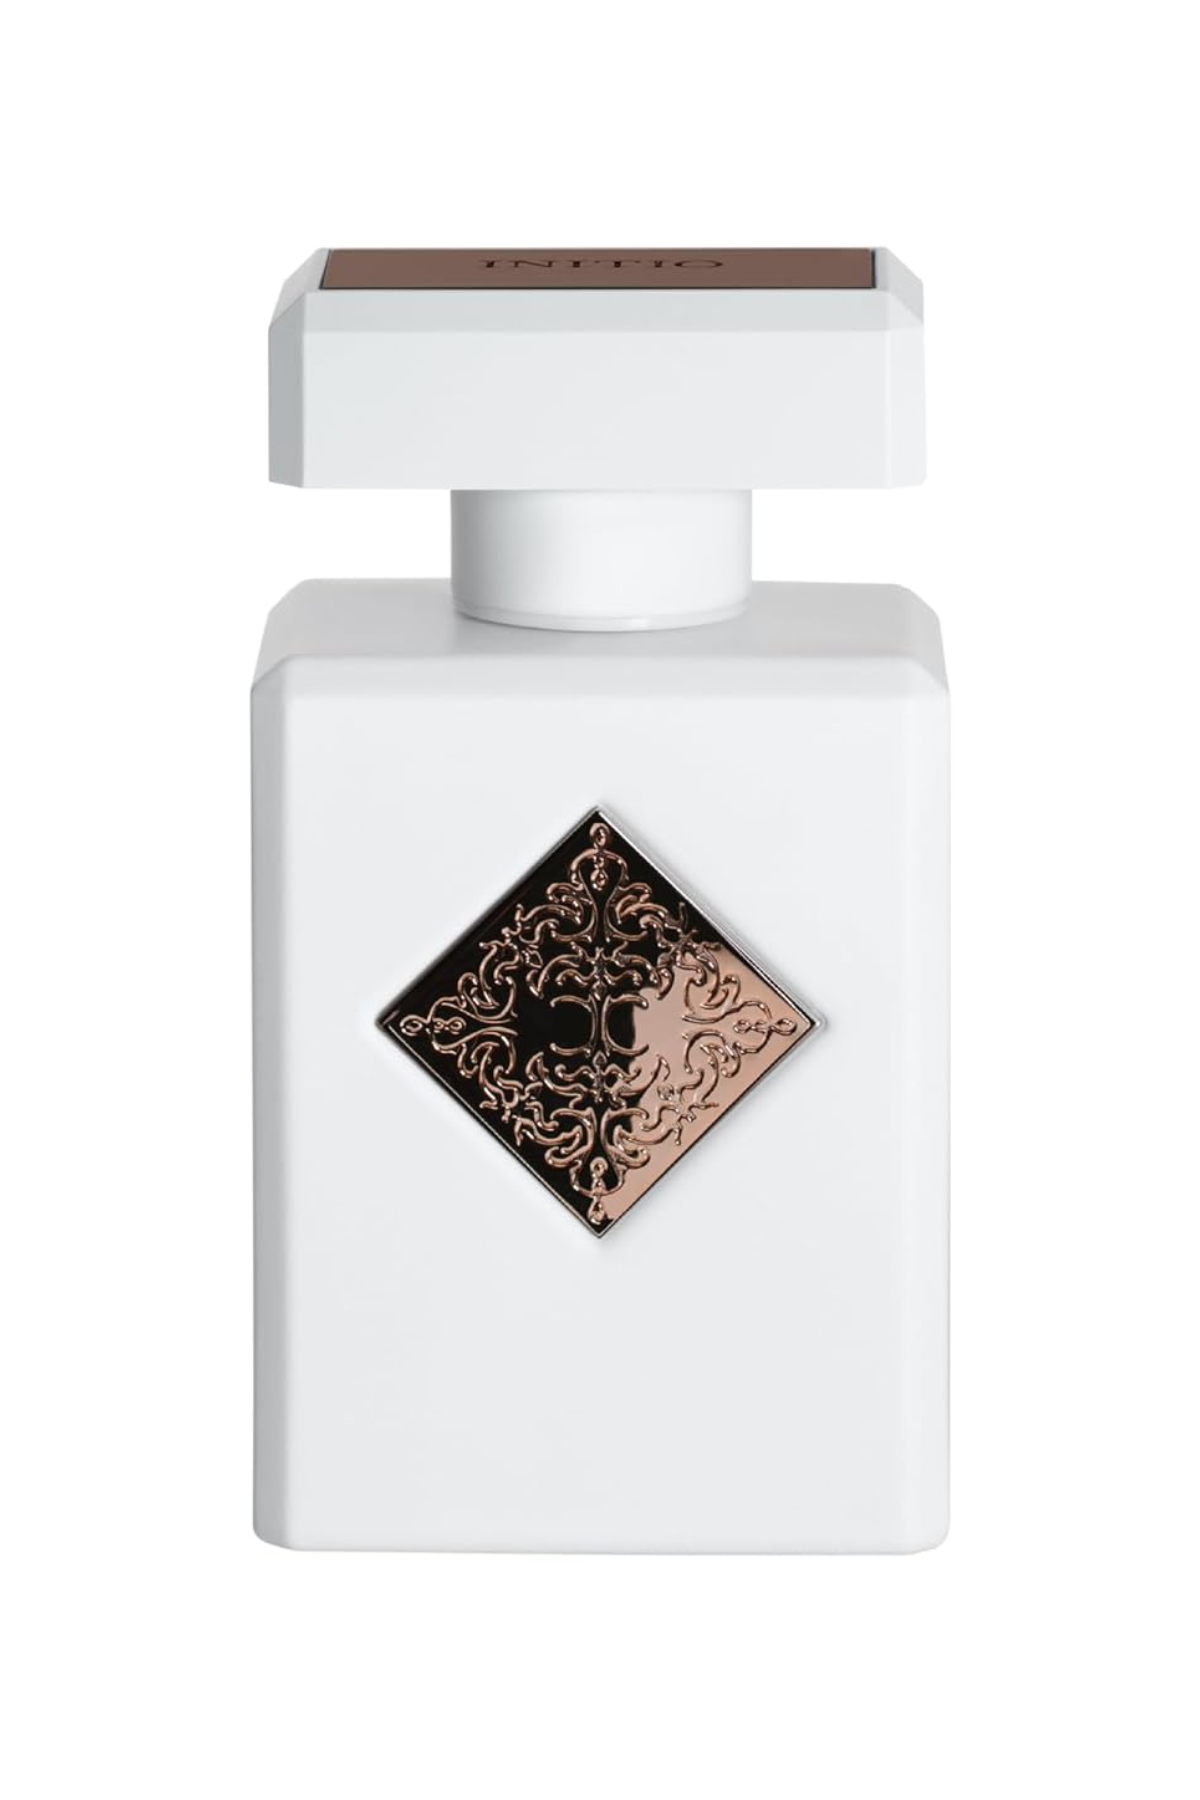 A bottle of Initio Paragon perfume against a white background.